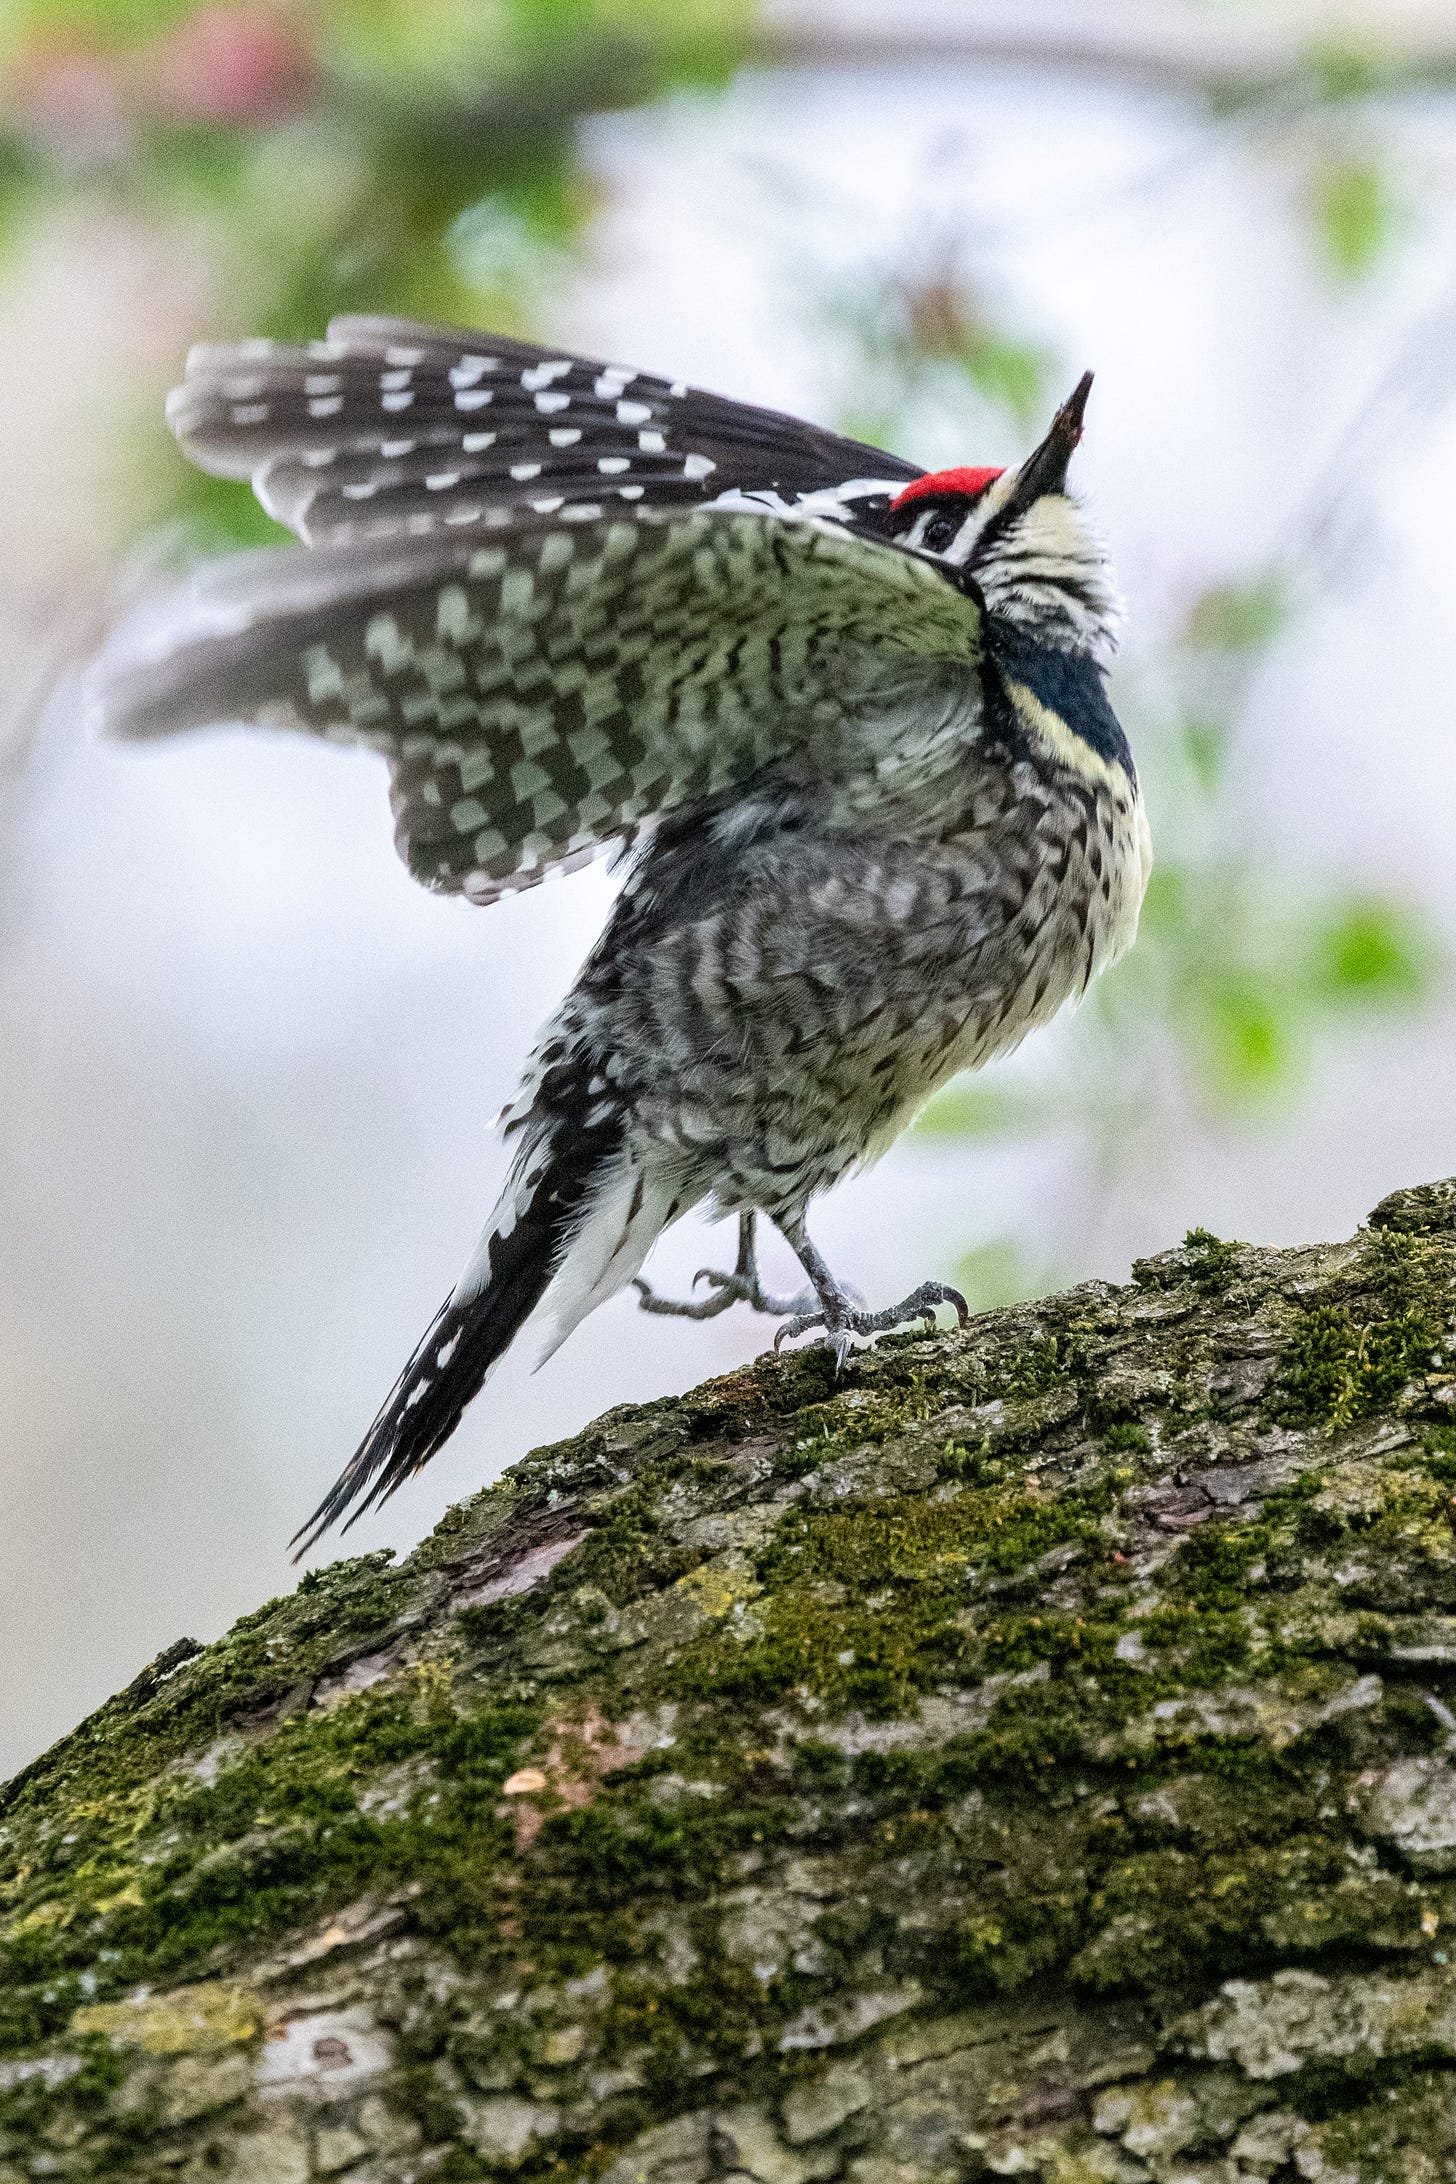 A black-and-white bird with a red crown, wings raised, is about to lift off from an almost horizontal tree trunk